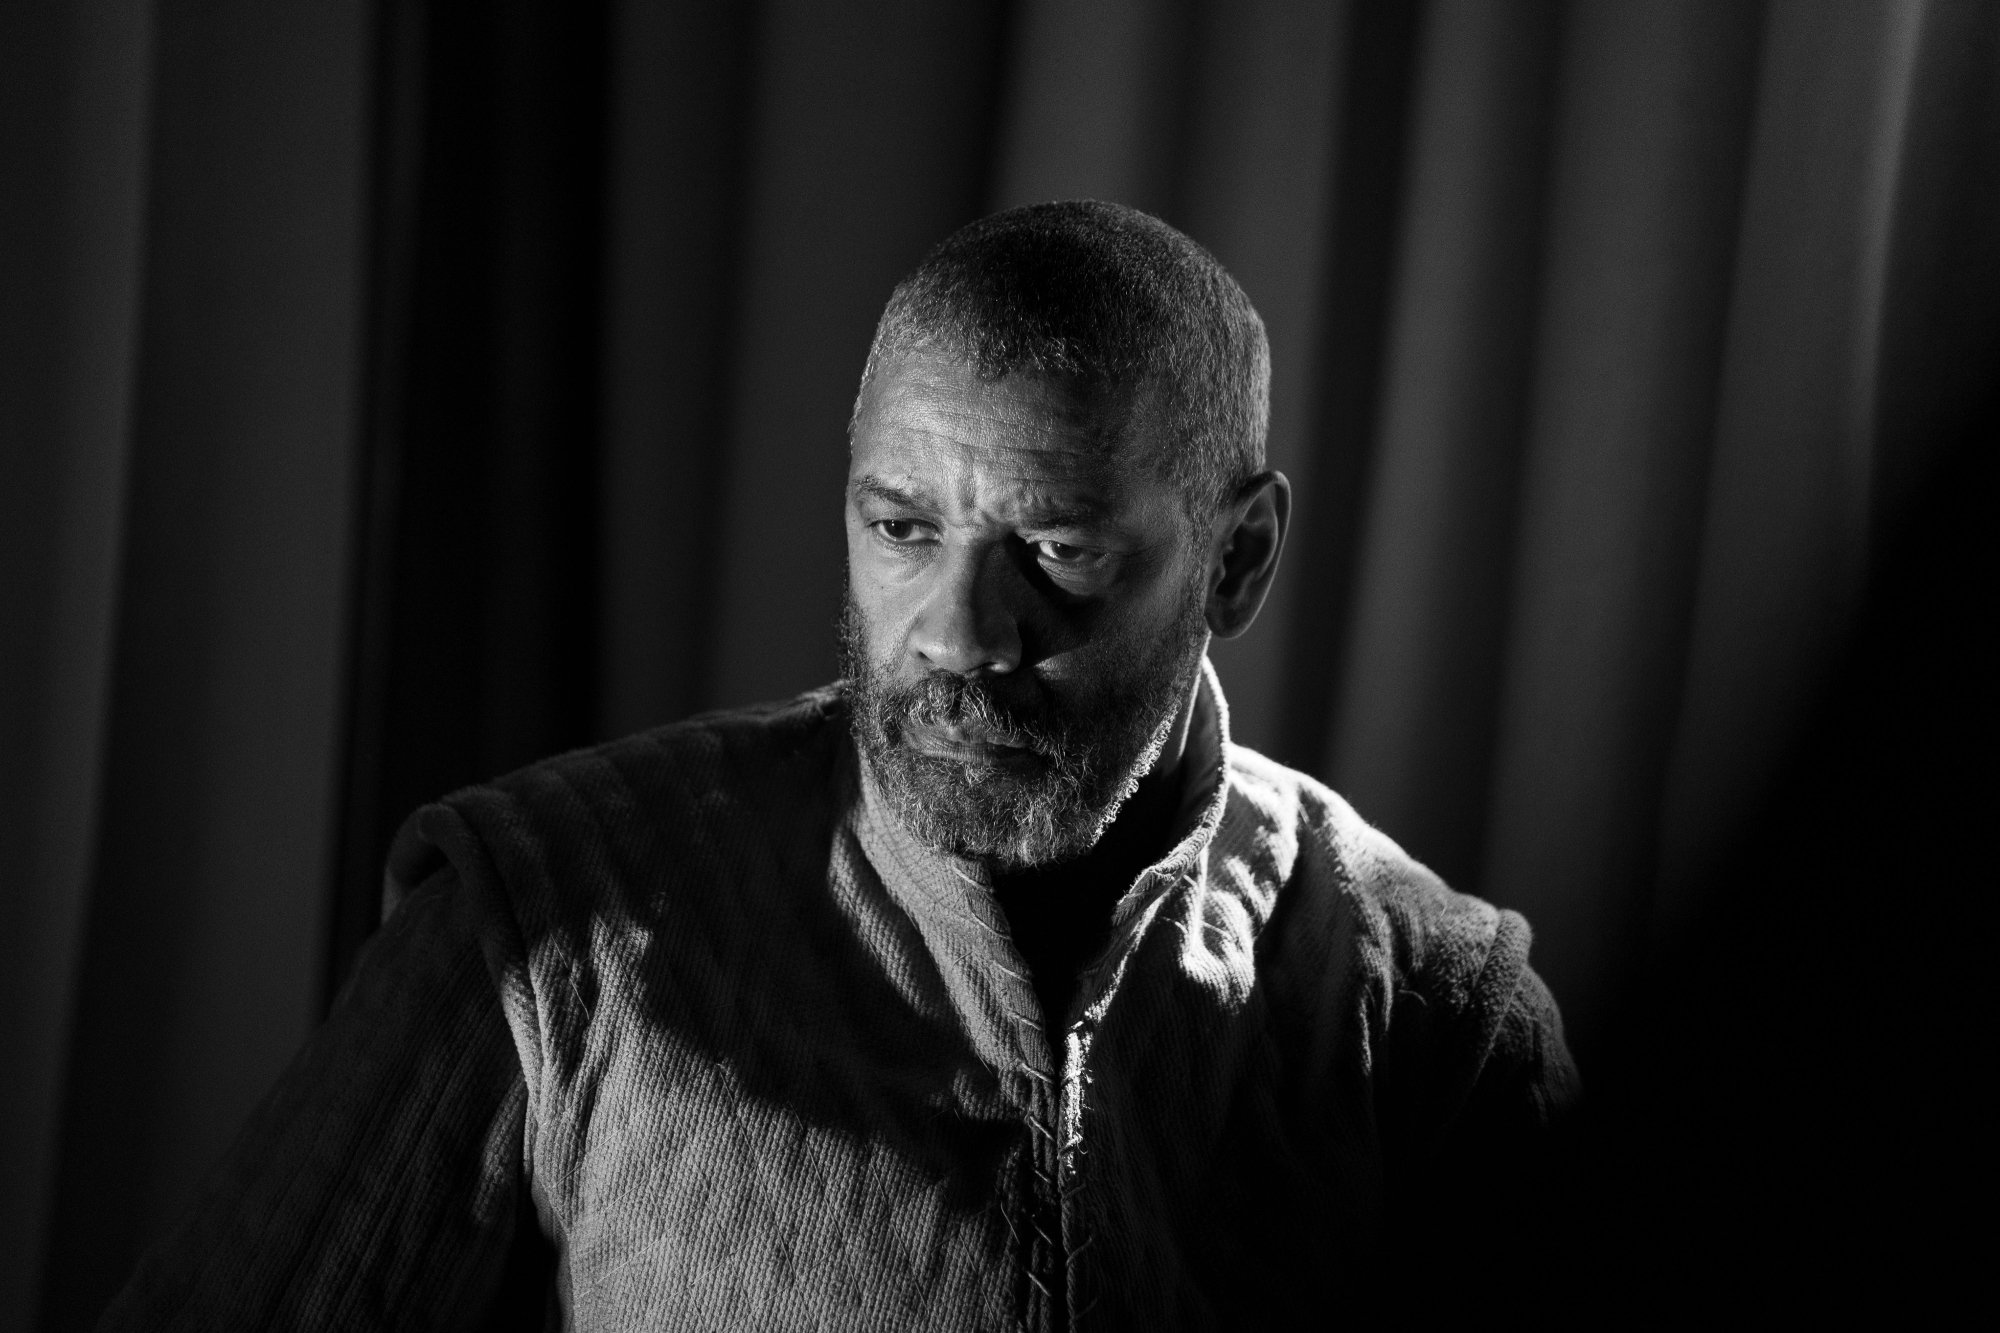 'The Tragedy of Macbeth' SAG Awards 2022 nominee Denzel Washington as Macbeth in black-and-white looking displeased